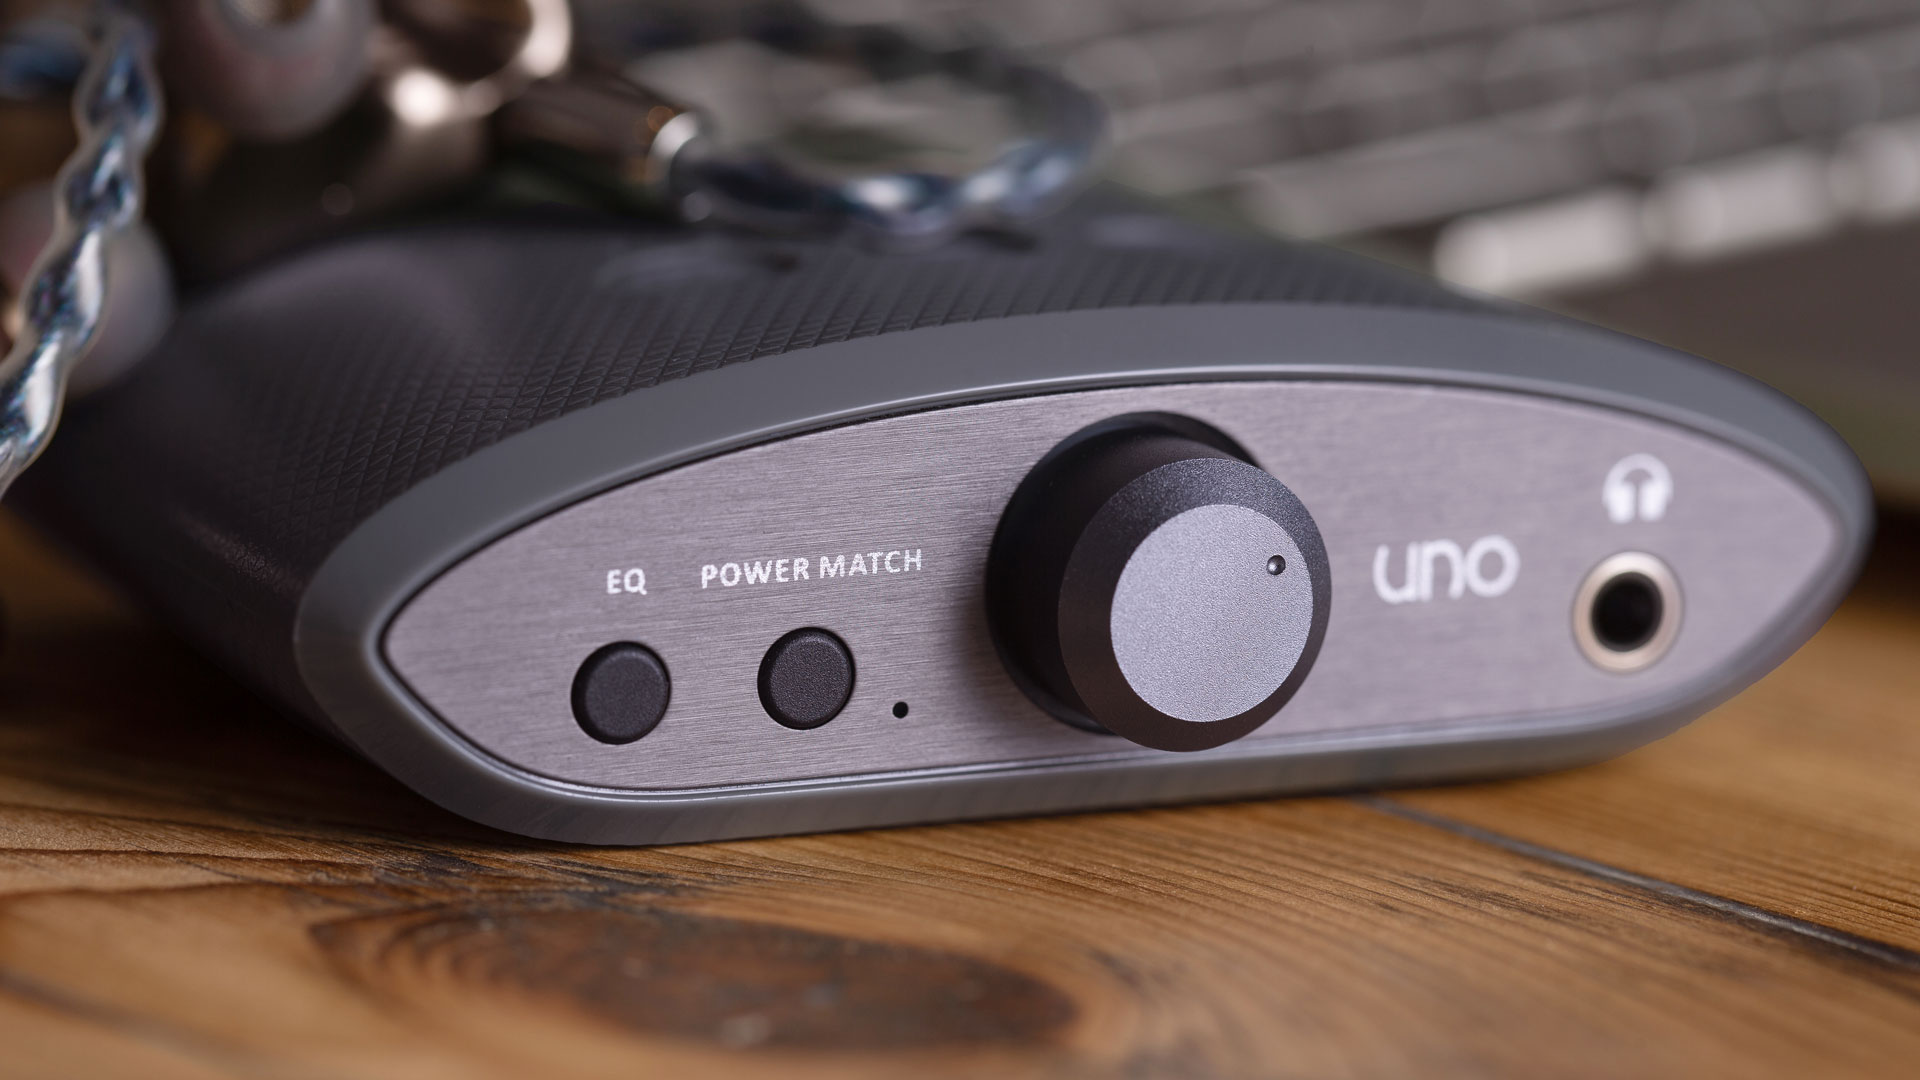 The new DAC Uno from iFi (Image Credit: iFi)